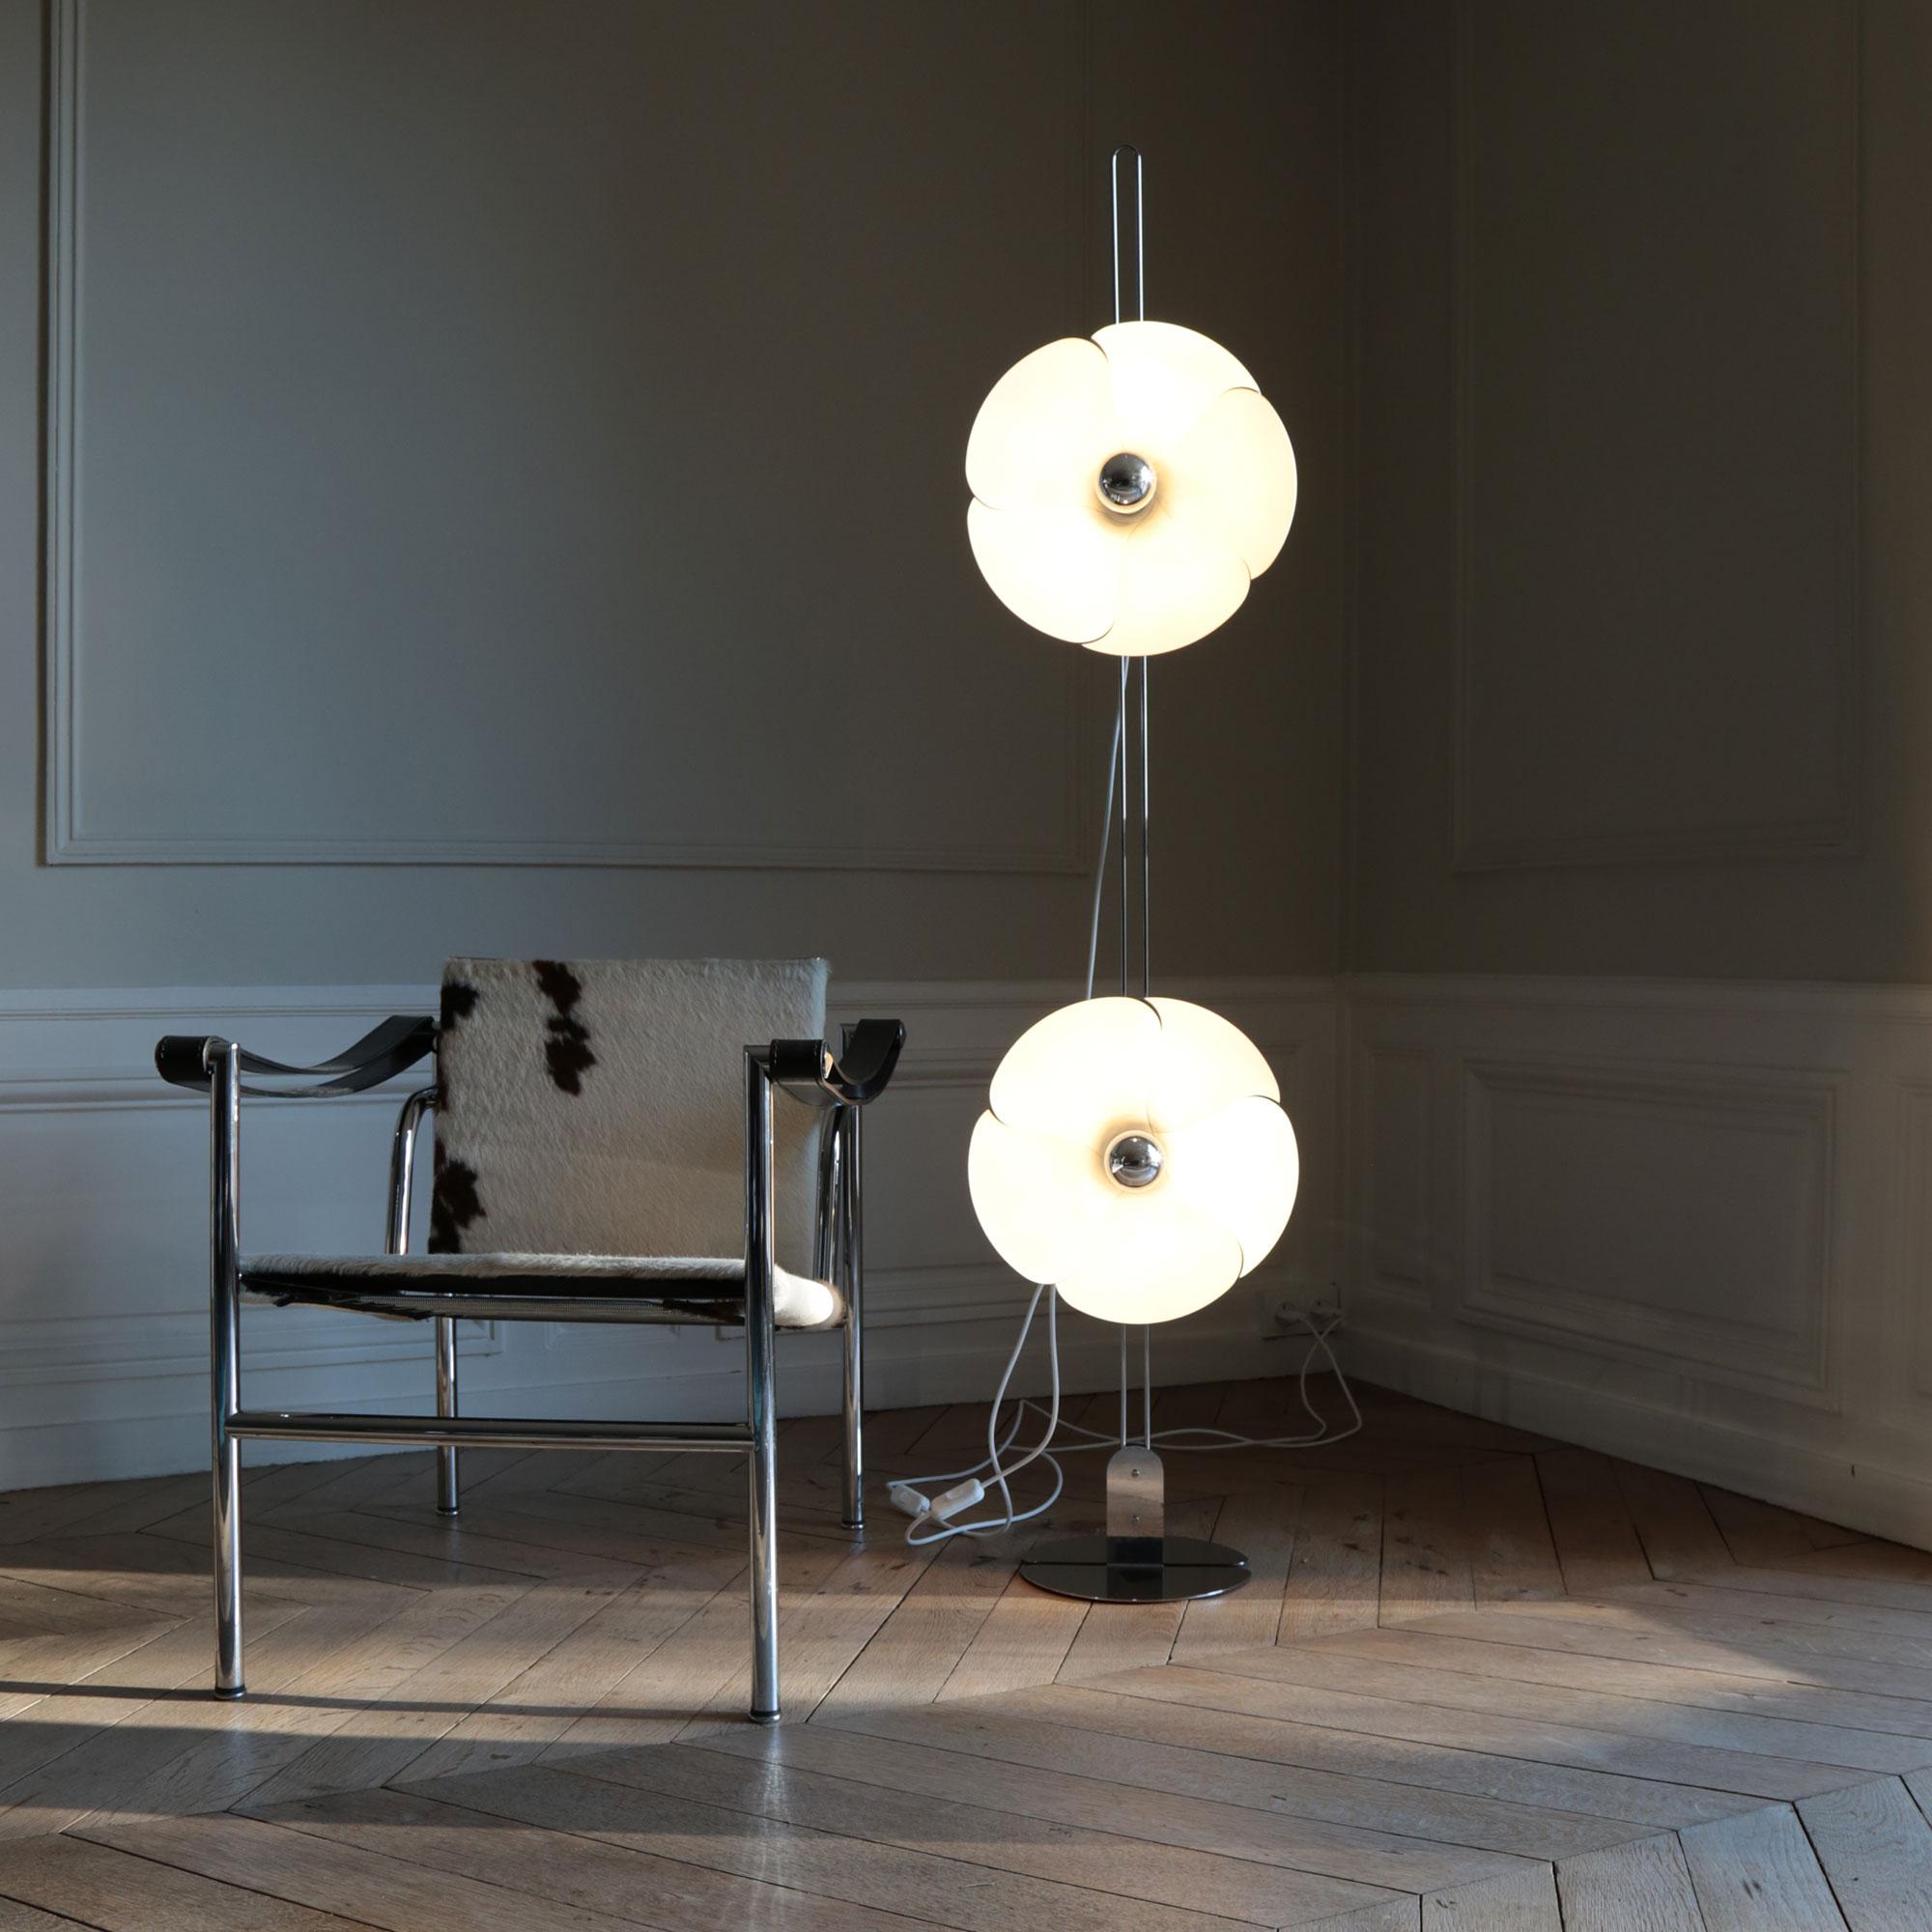 Olivier Mourgue model 2093-150 floor lamp for Disderot

Originally designed in 1969, this sculptural floor lamp is a newly produced numbered edition with authentication certificate made in France by Disderot with many of the same small-scale